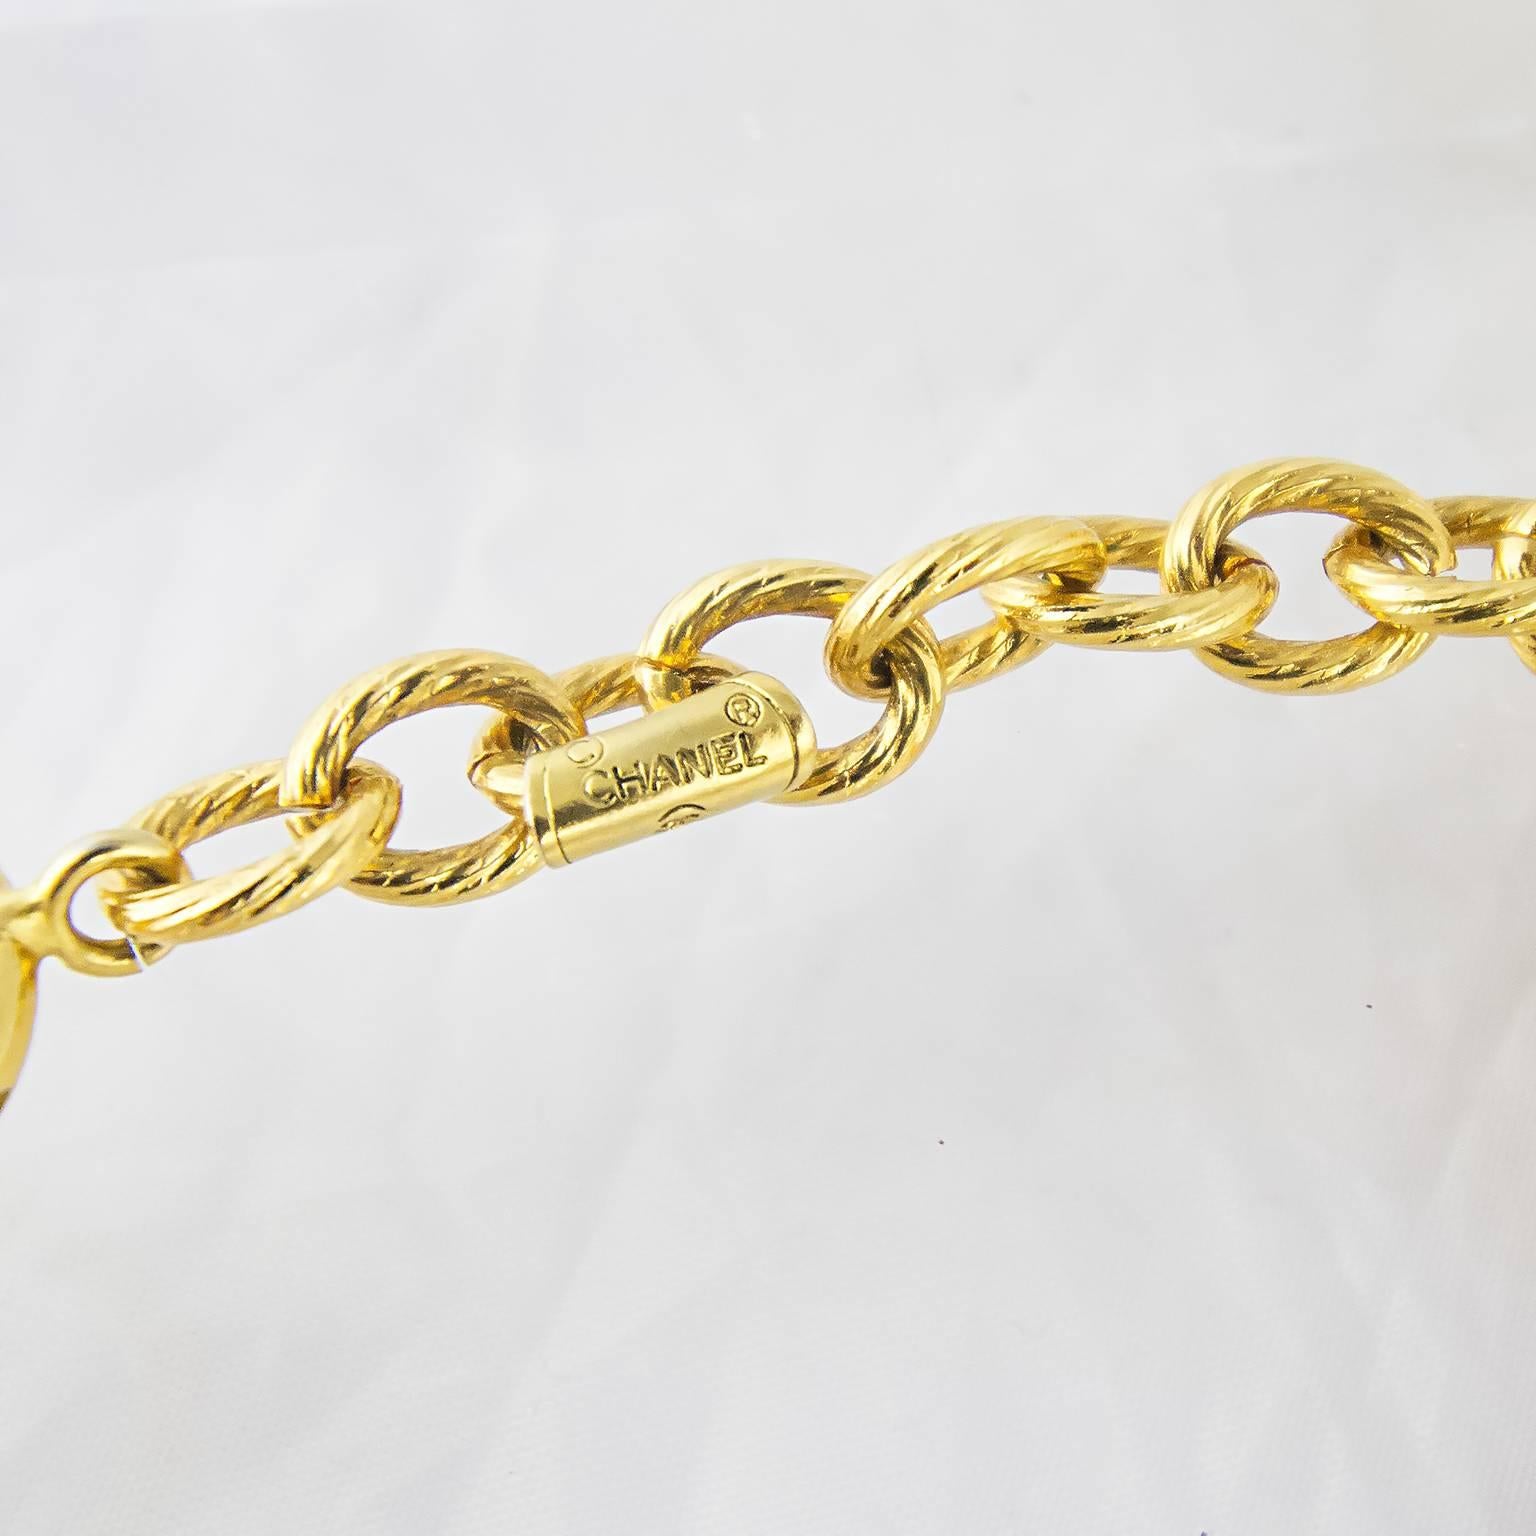 An unusual Chanel chain necklace with bow detail.
Made from high carat gold plated metal in the 1980's.
In an excellent condition and fully signed.
Please note that the length of this necklace is fairly short and will therefore sit on the